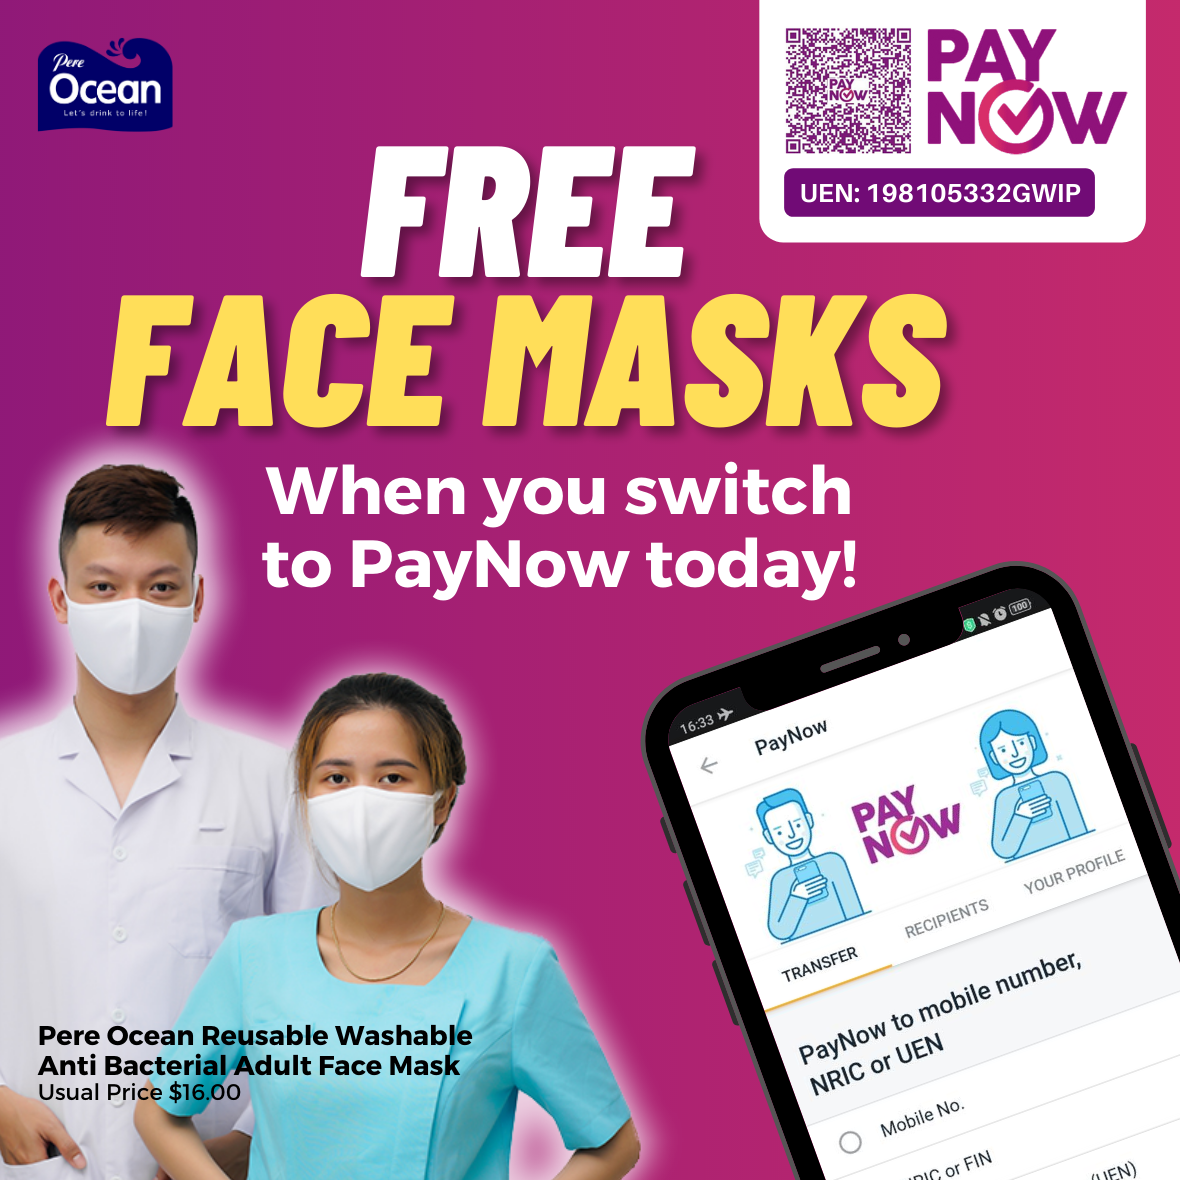 Pere Ocean Switch to PayNow Today Redeem Free Reusable Face Masks